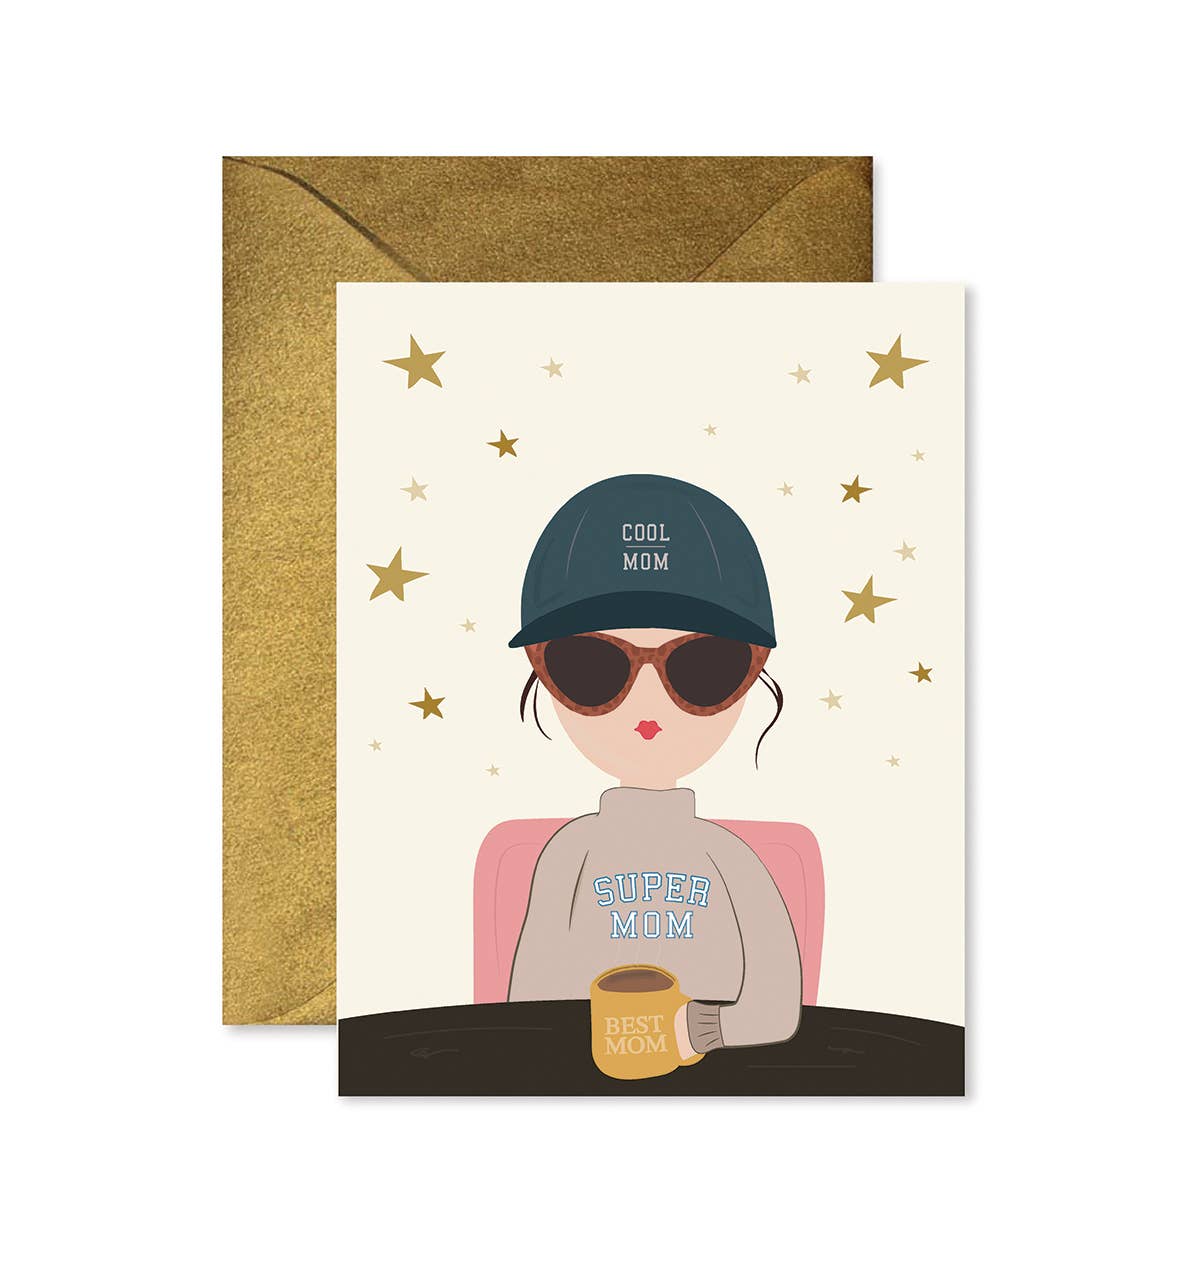 Cool Mom Greeting Card with coordinating envelope by Ginger P. Designs. A women sitting at a table is wearing a cool mom hat, super mom shirt, and drinking from a best mom mug.